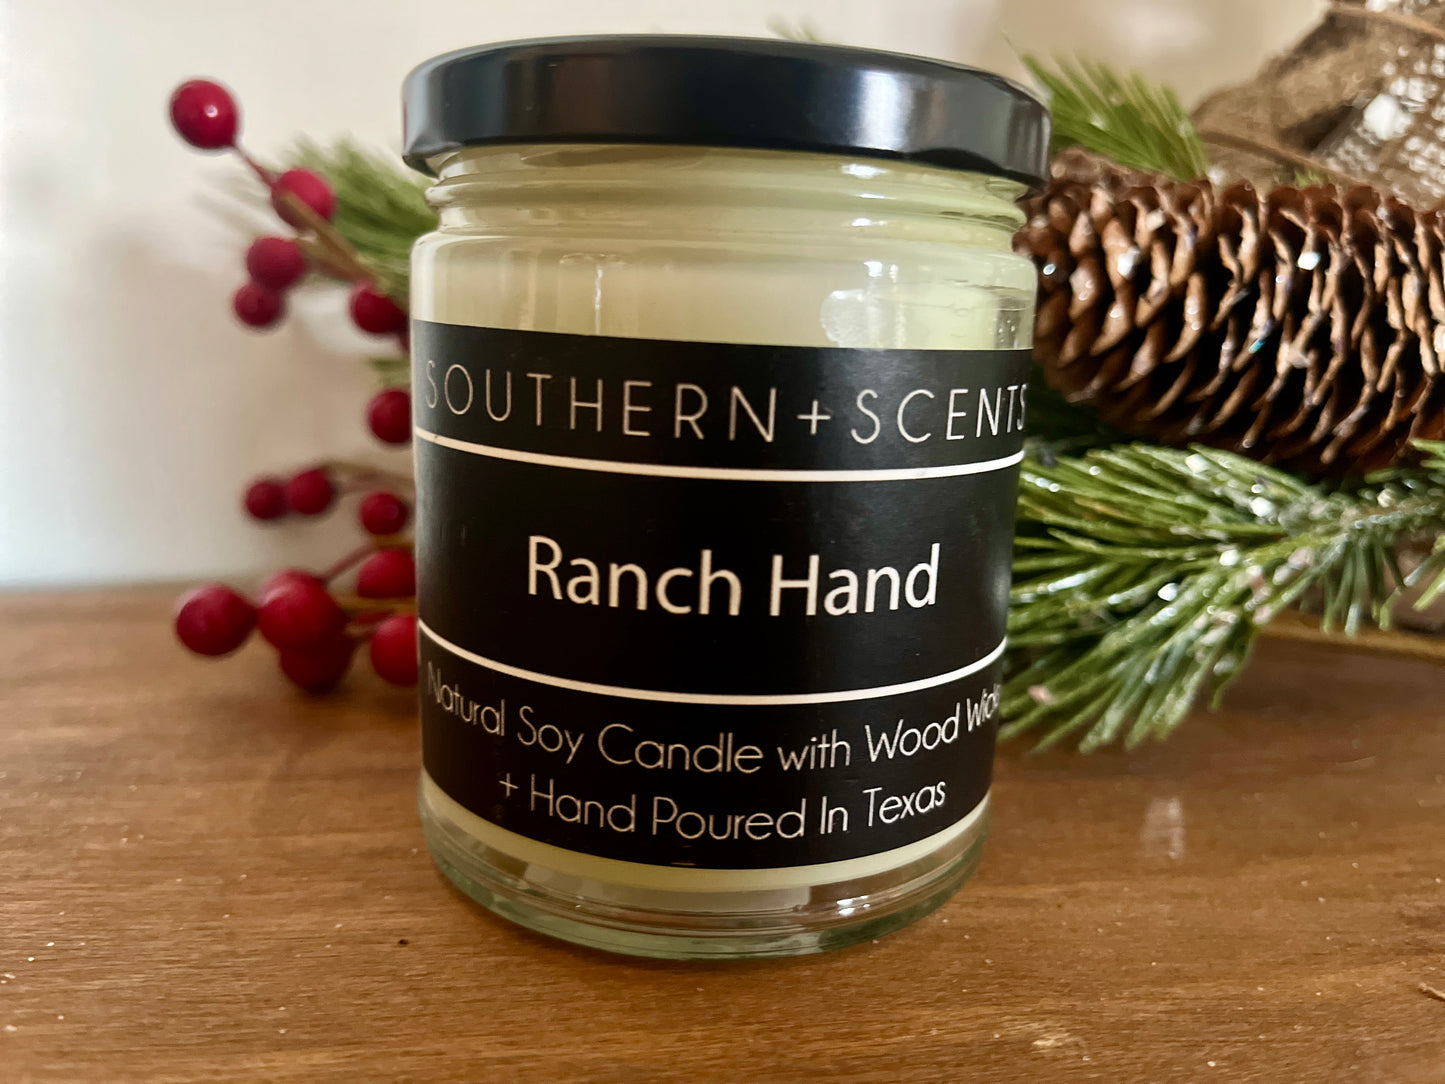 Ranch hand candle